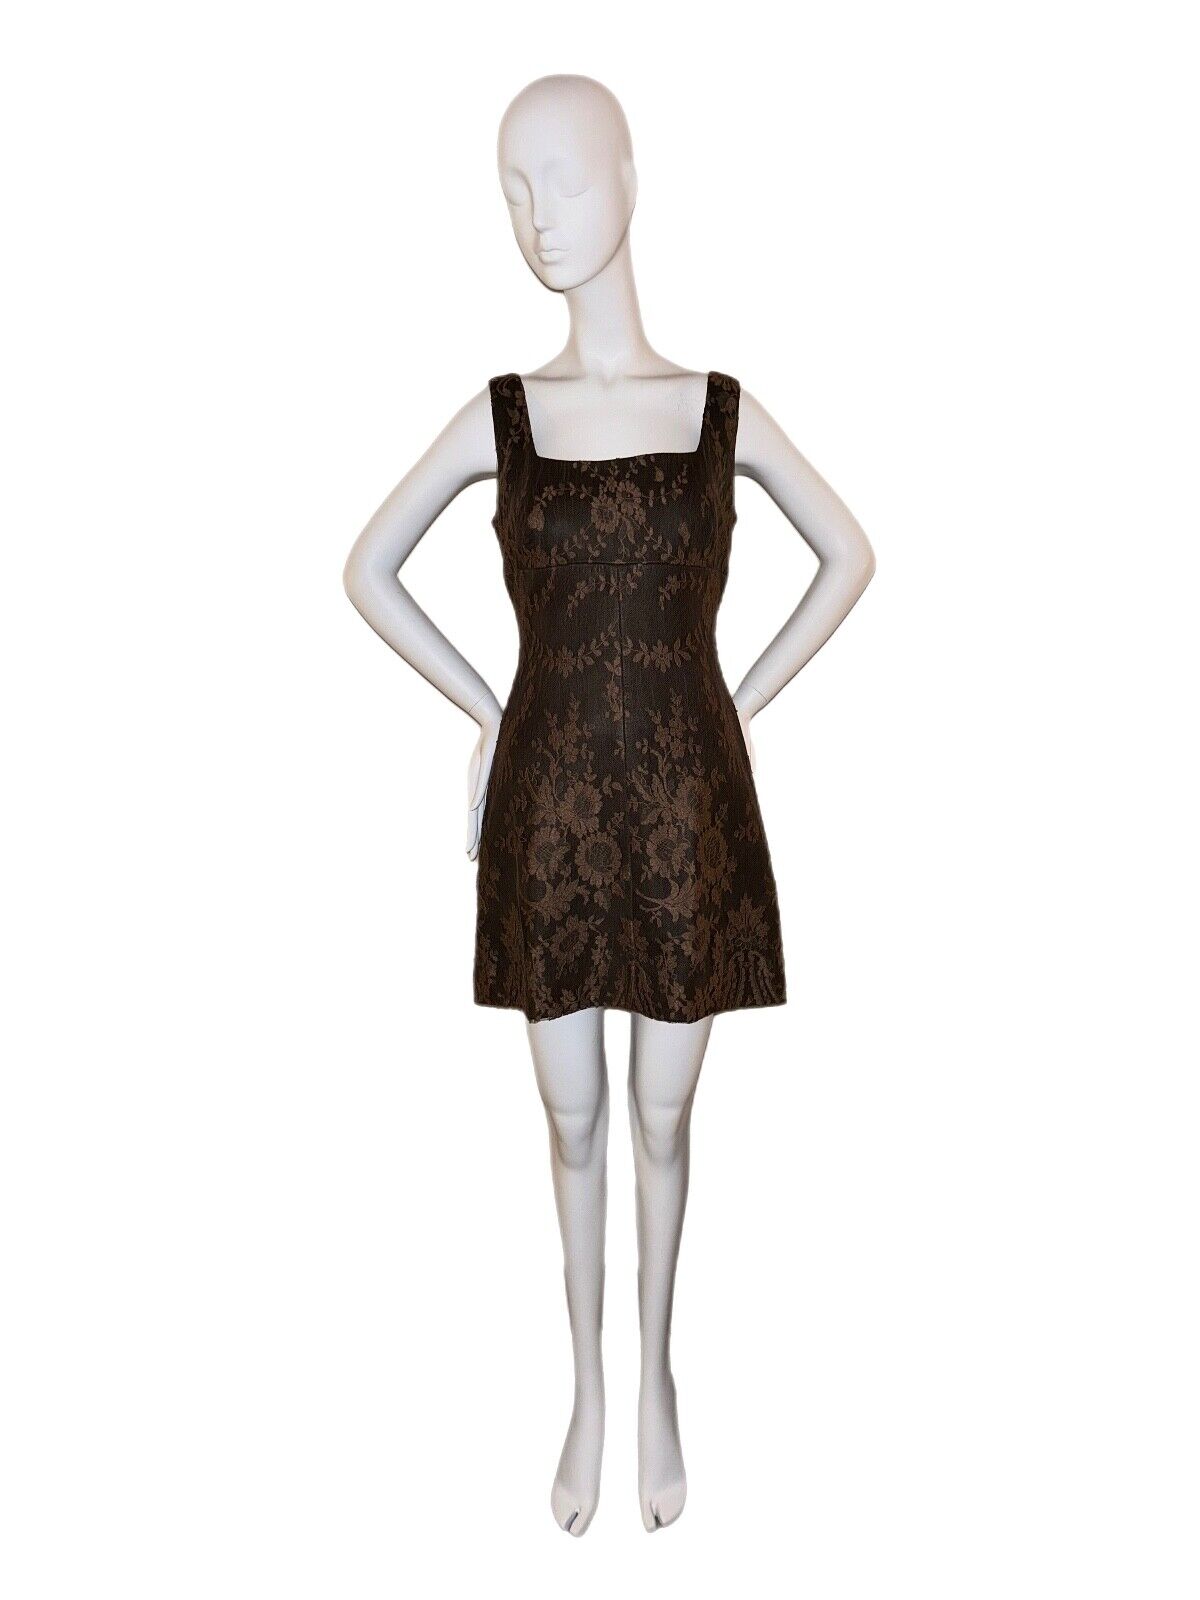 Gianni Versace 1996 Vintage Brown Leather and Lace Mini Dress